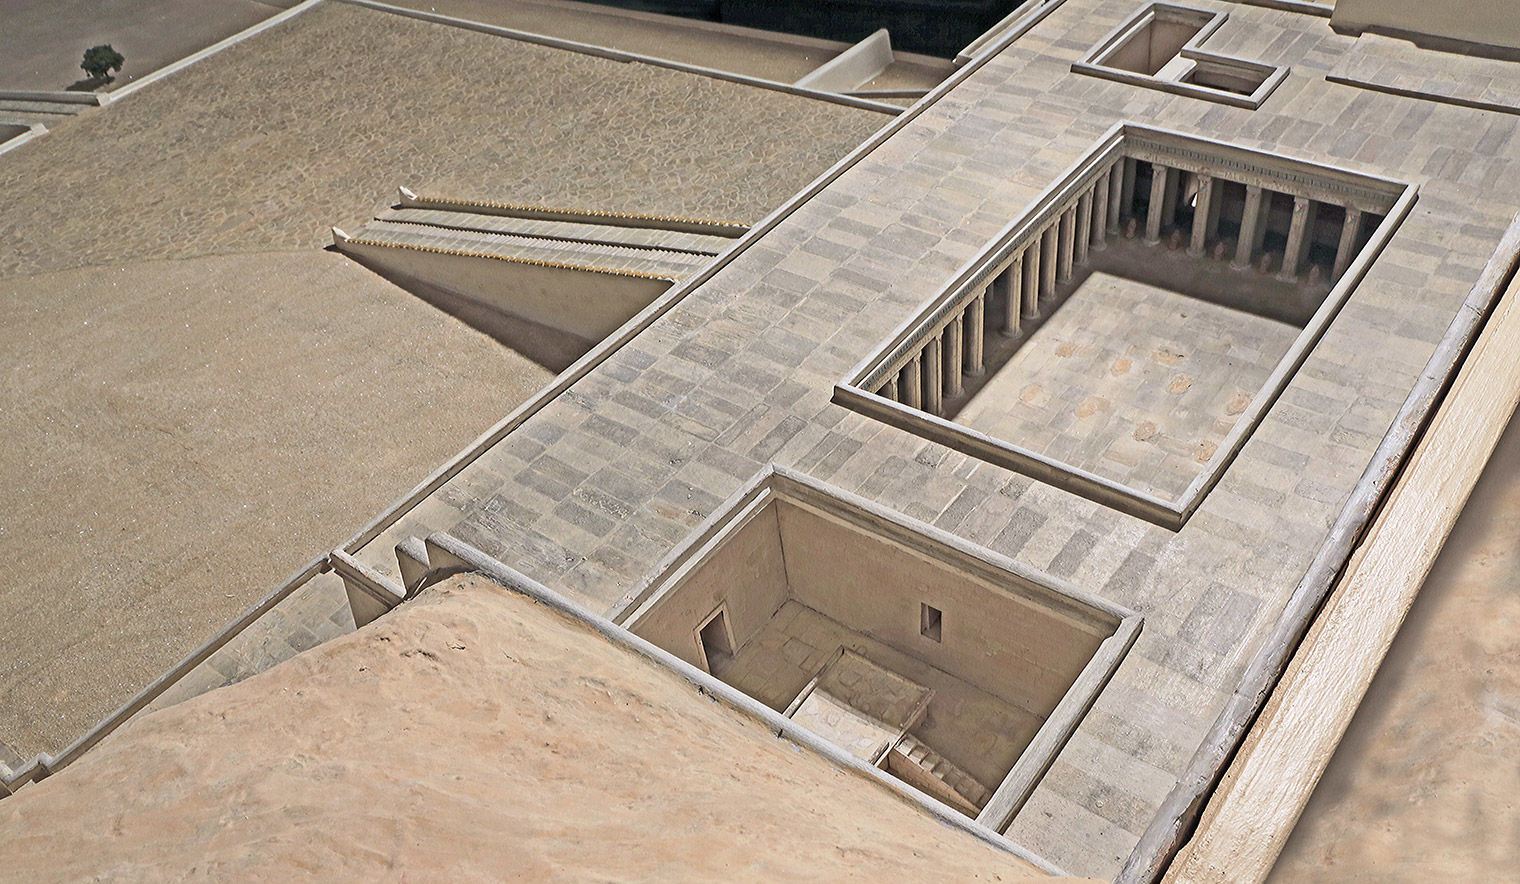 Bird's eye view of the top of a stone building, with a large ramp in front and an altar with a ramp inside.